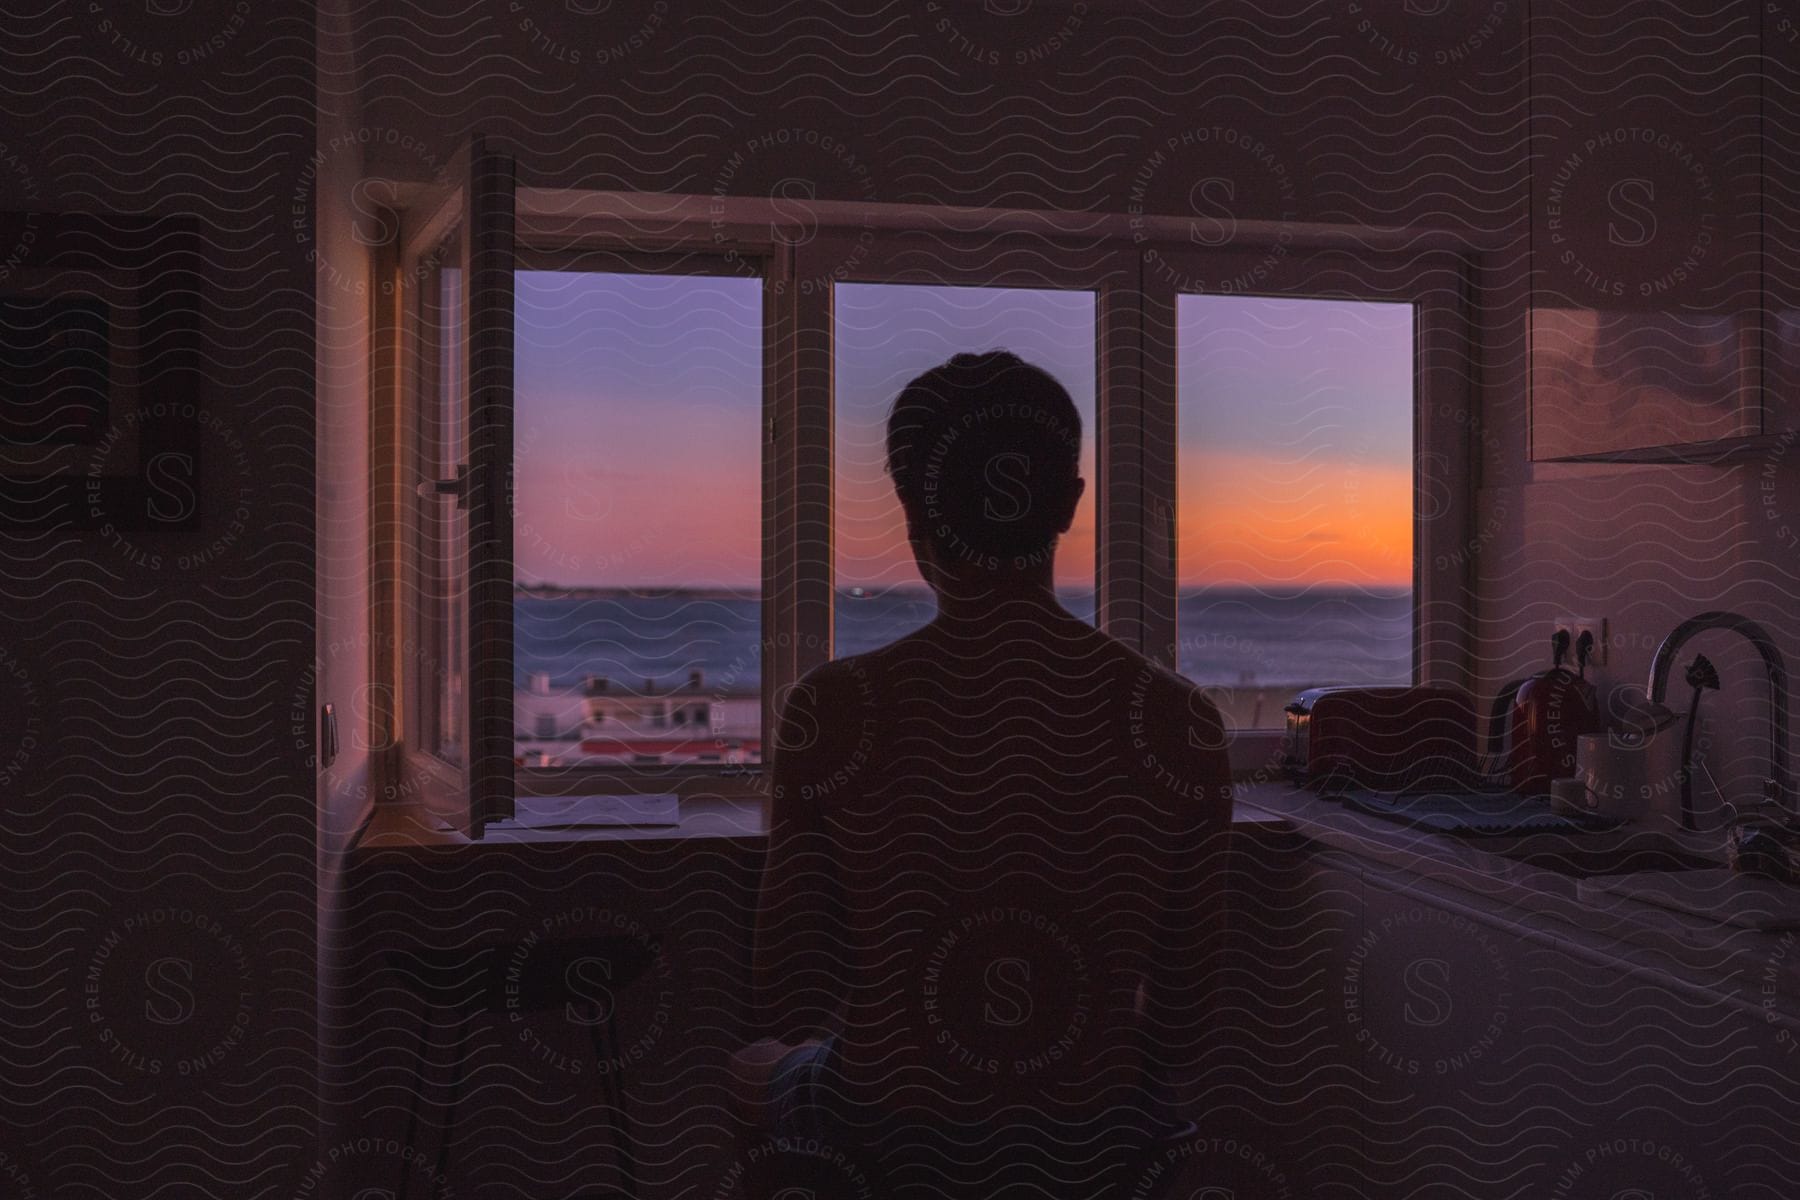 A man sitting by a kitchen window watching the sunset over the ocean